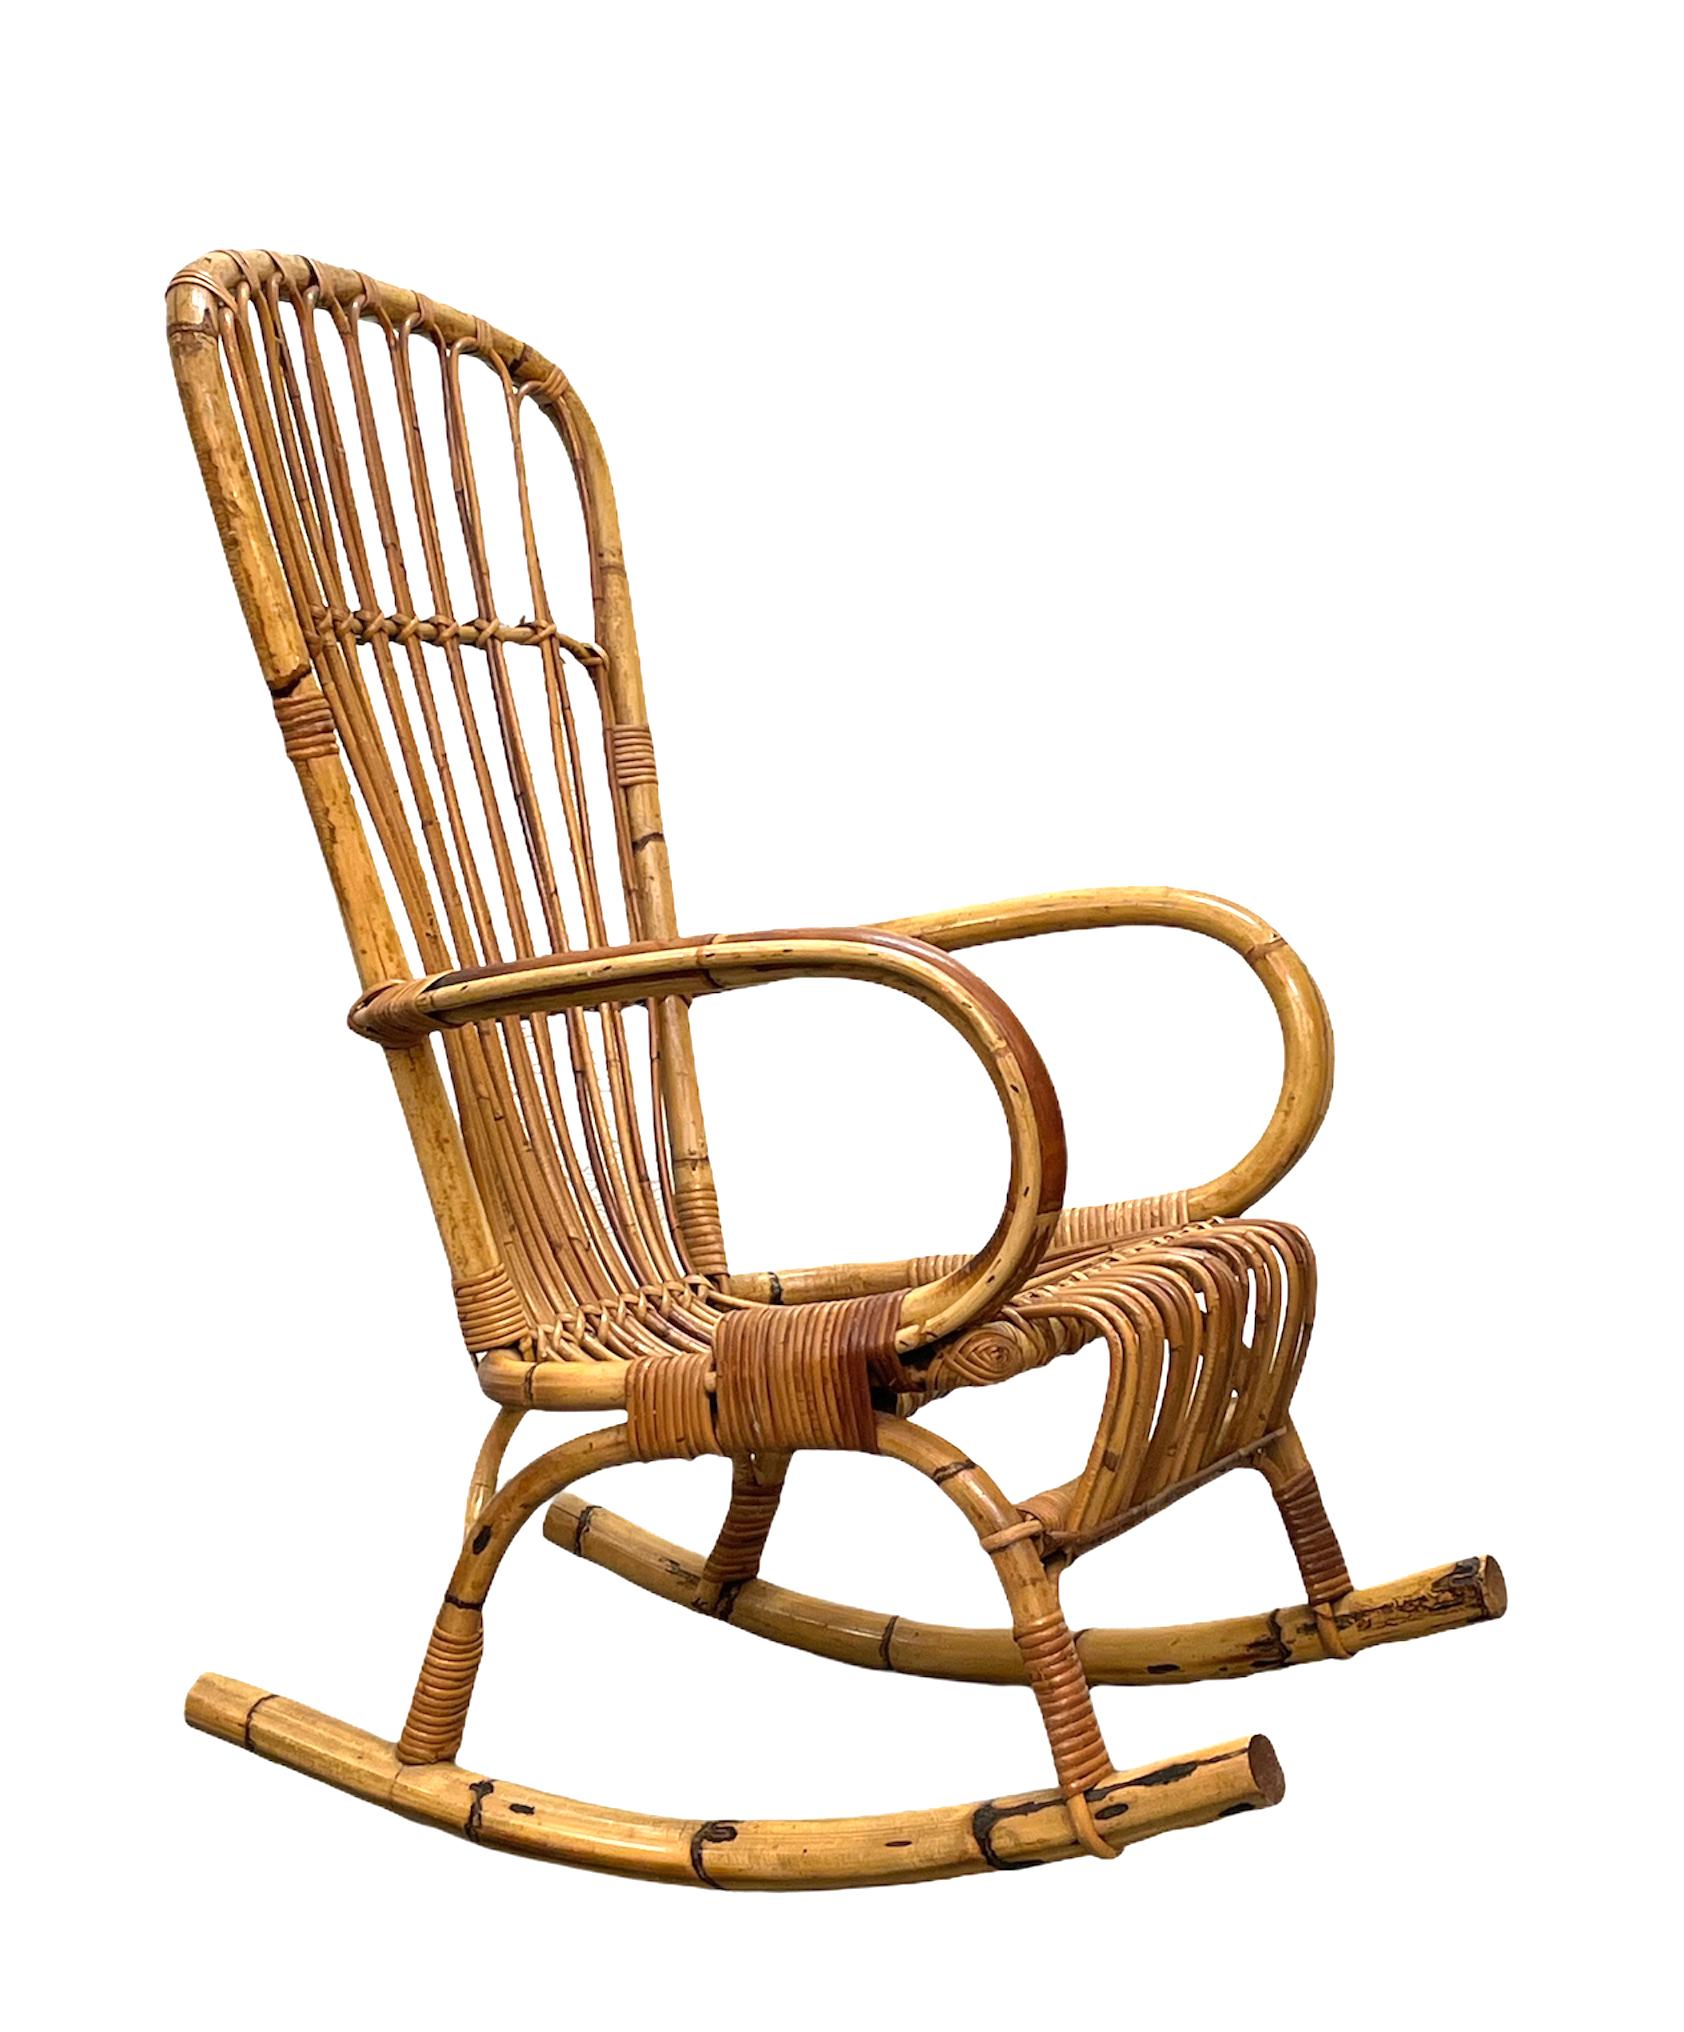 Midcentury French Riviera Rattan and Bamboo Italian Rocking Chair, 1960s For Sale 3